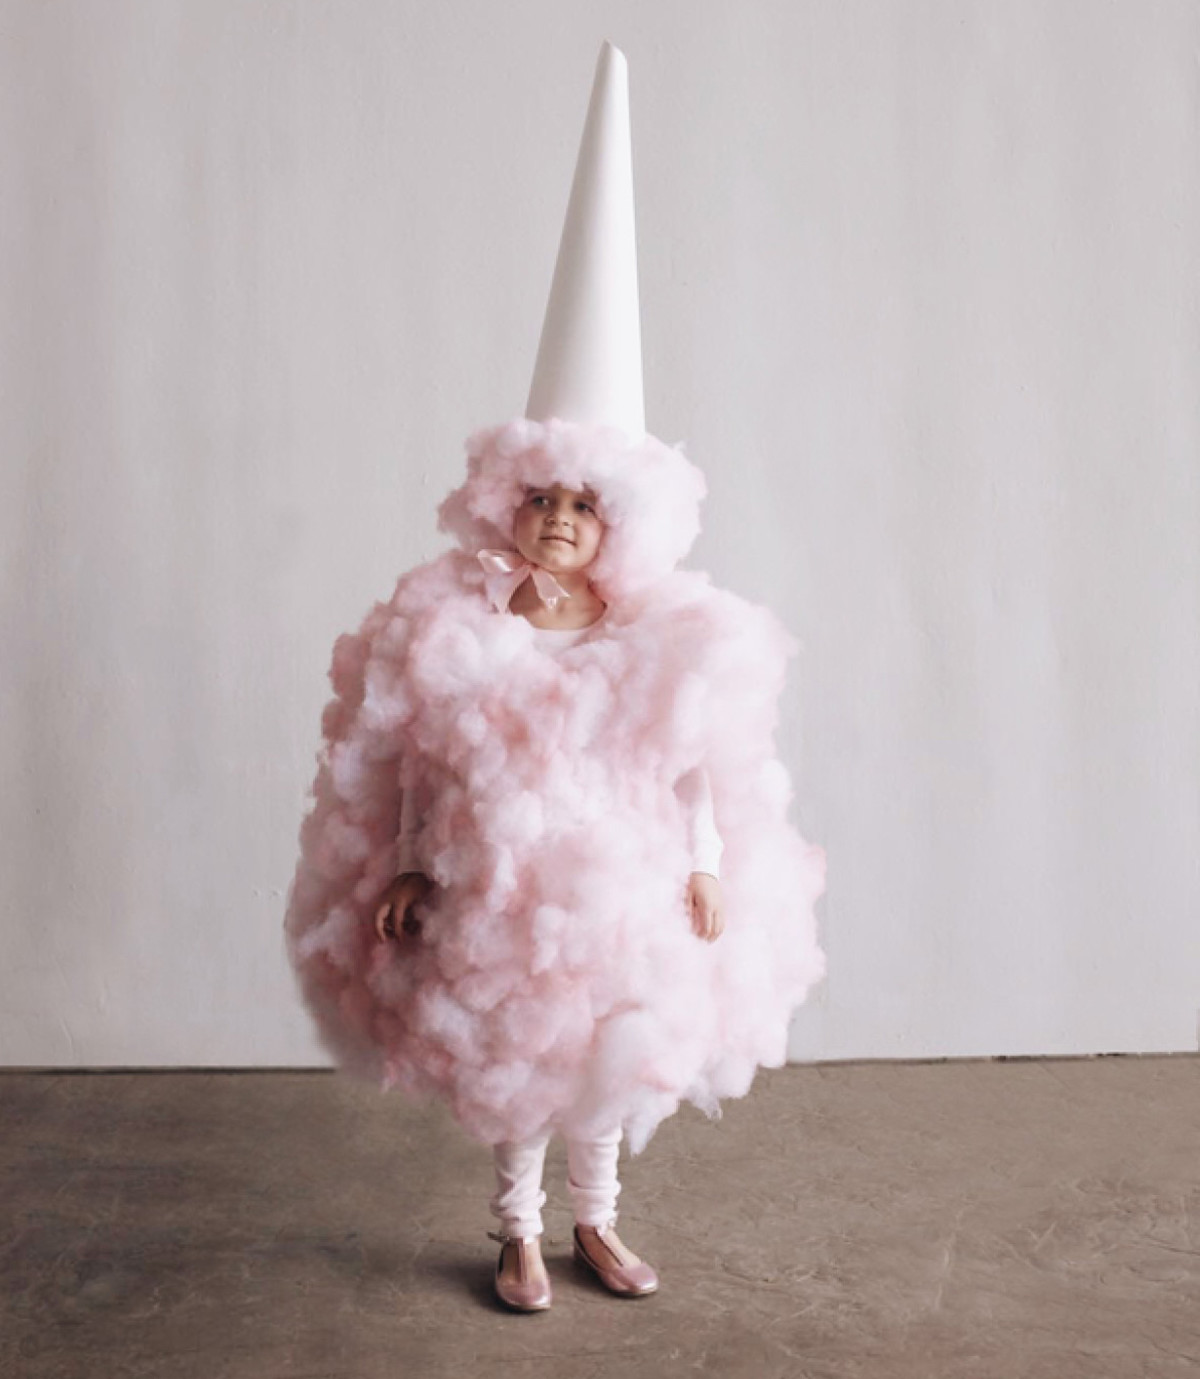 kid wearing pink cotton candy costume which is one of the best cheap costume ideas for adults or kids